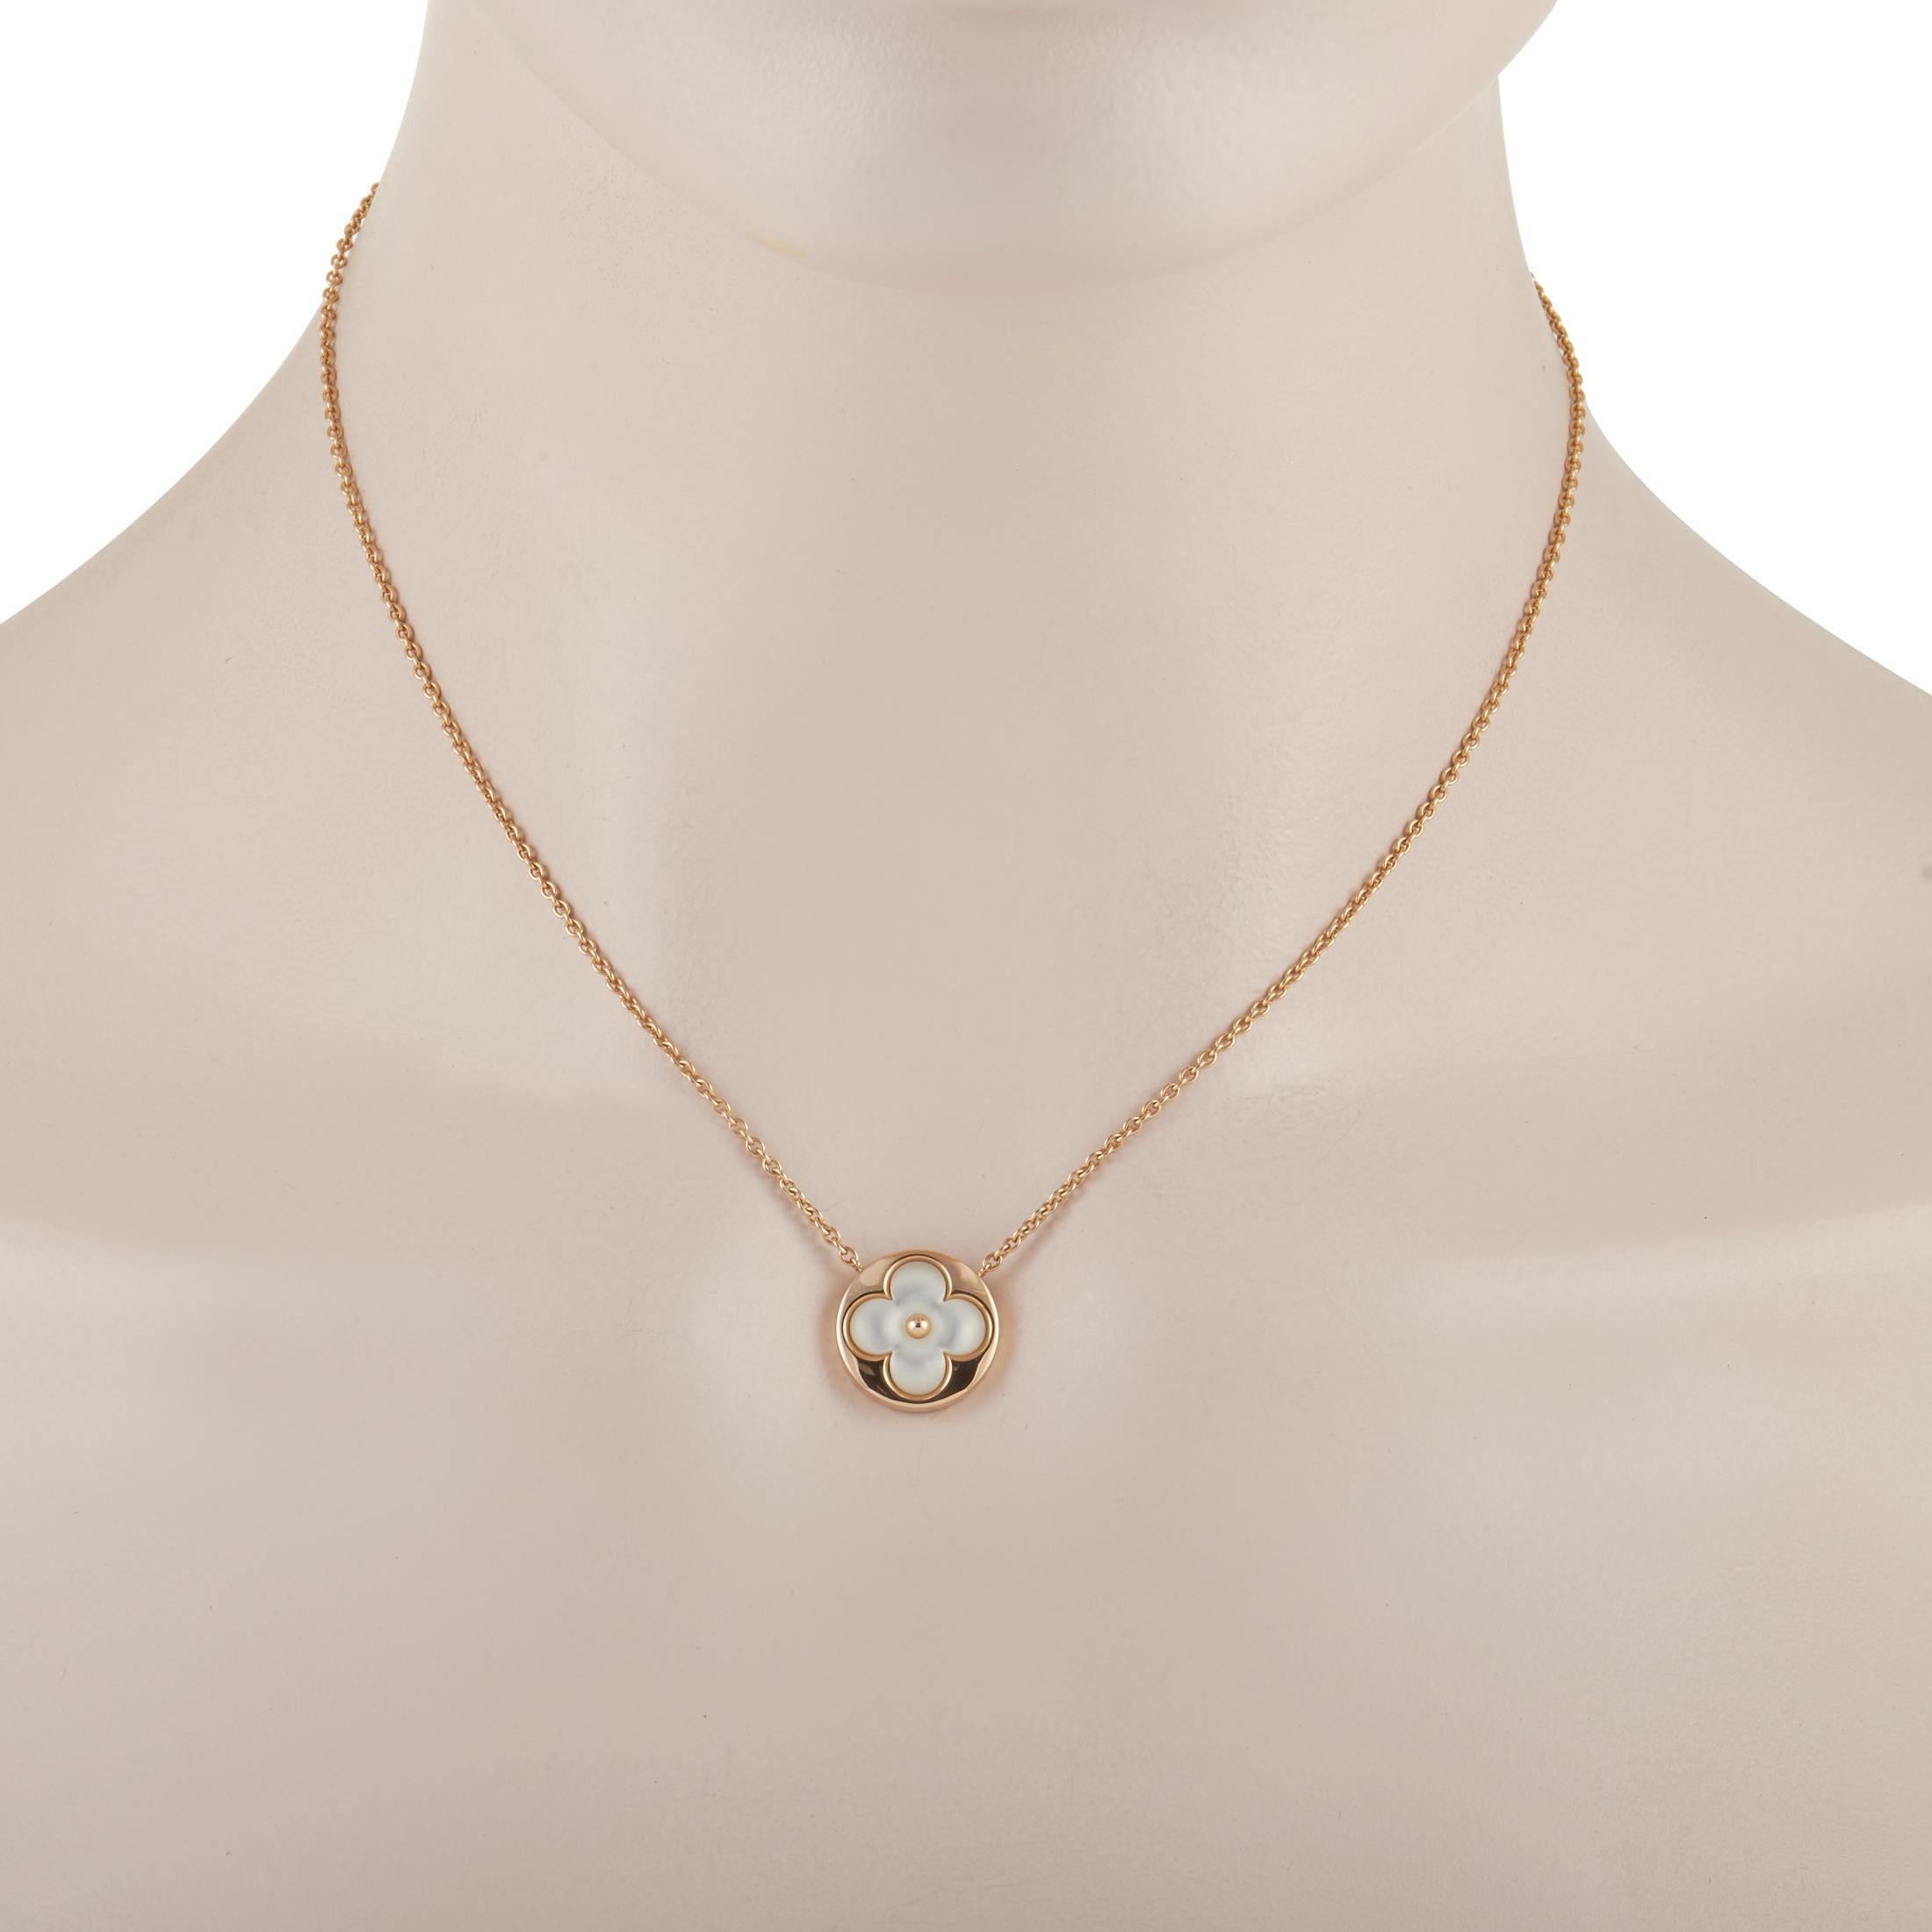 This charming Louis Vuitton Color Blossom Sun Pendant celebrates the luxury brand’s iconic monogram flowers. Crafted from 18K Rose Gold and suspended from a delicate 15” chain, the 0.5” round pendant features a breathtaking mother of pearl flower at